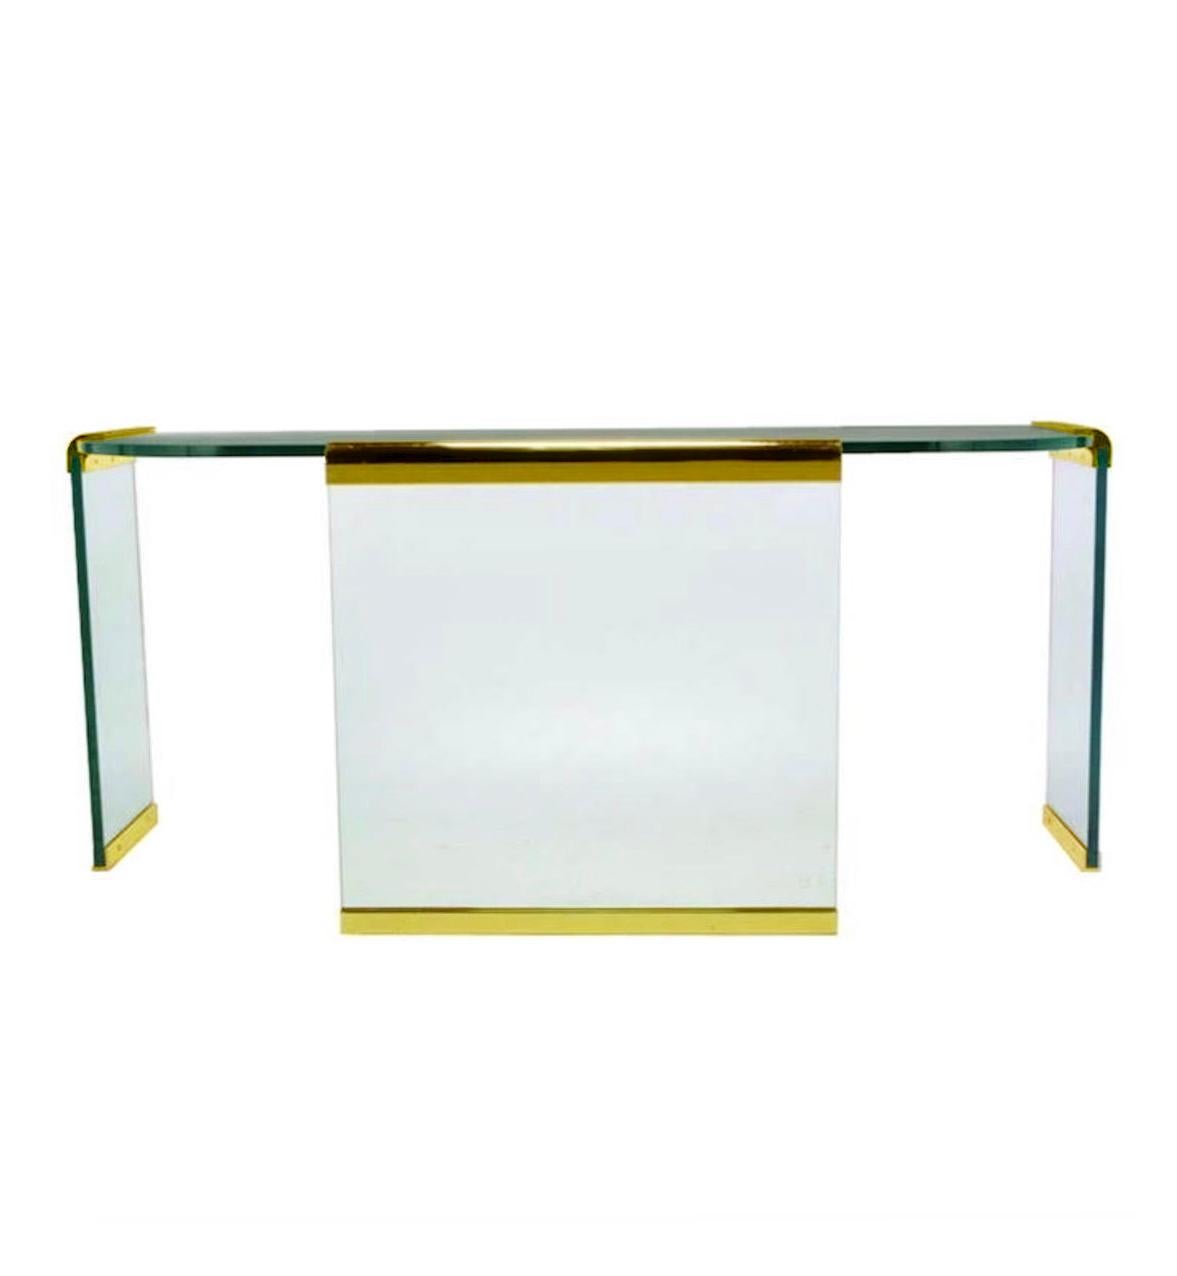 Mid-Century Modern Brass & Glass Desk or Console Table by Leon Rosen for Pace 1